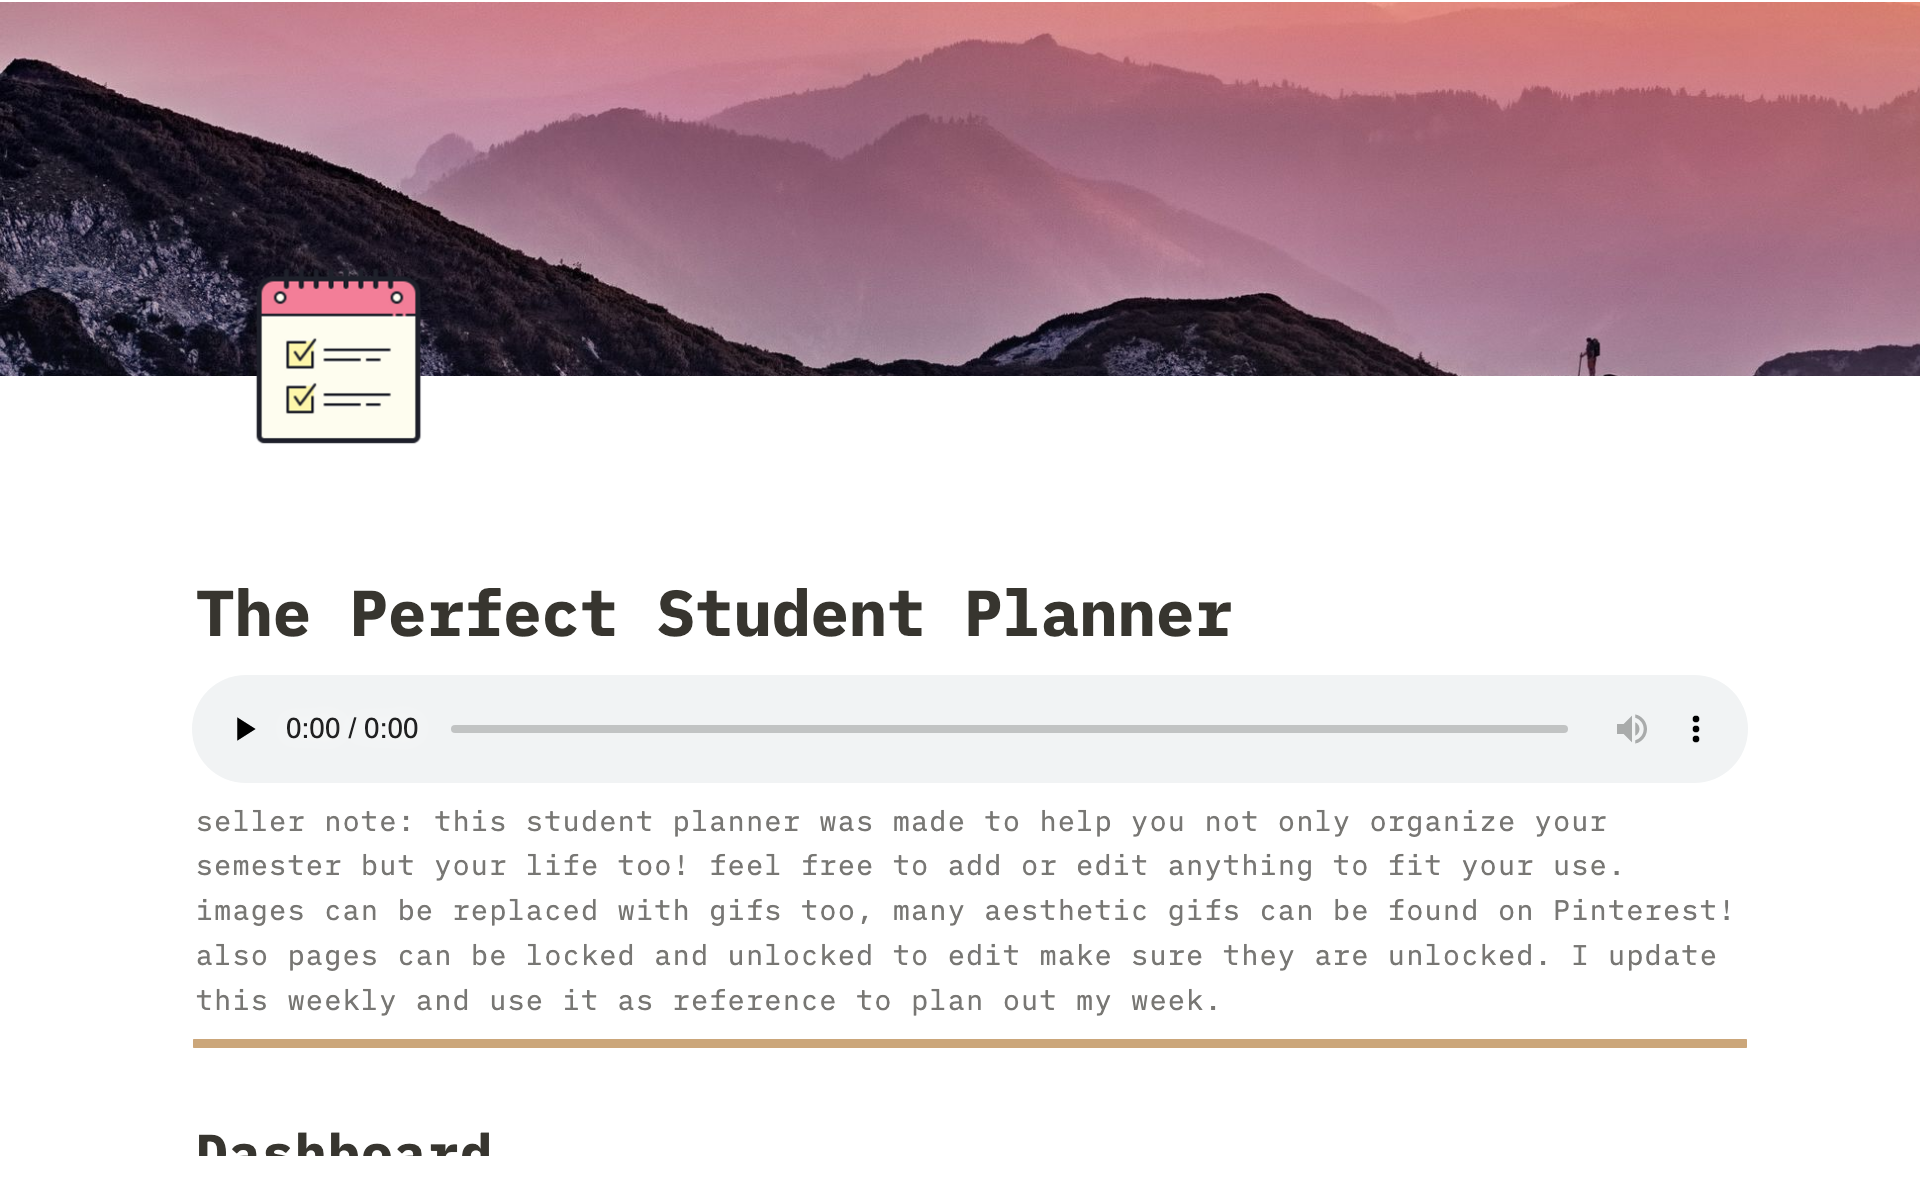 This template helps your organize your life as a student!